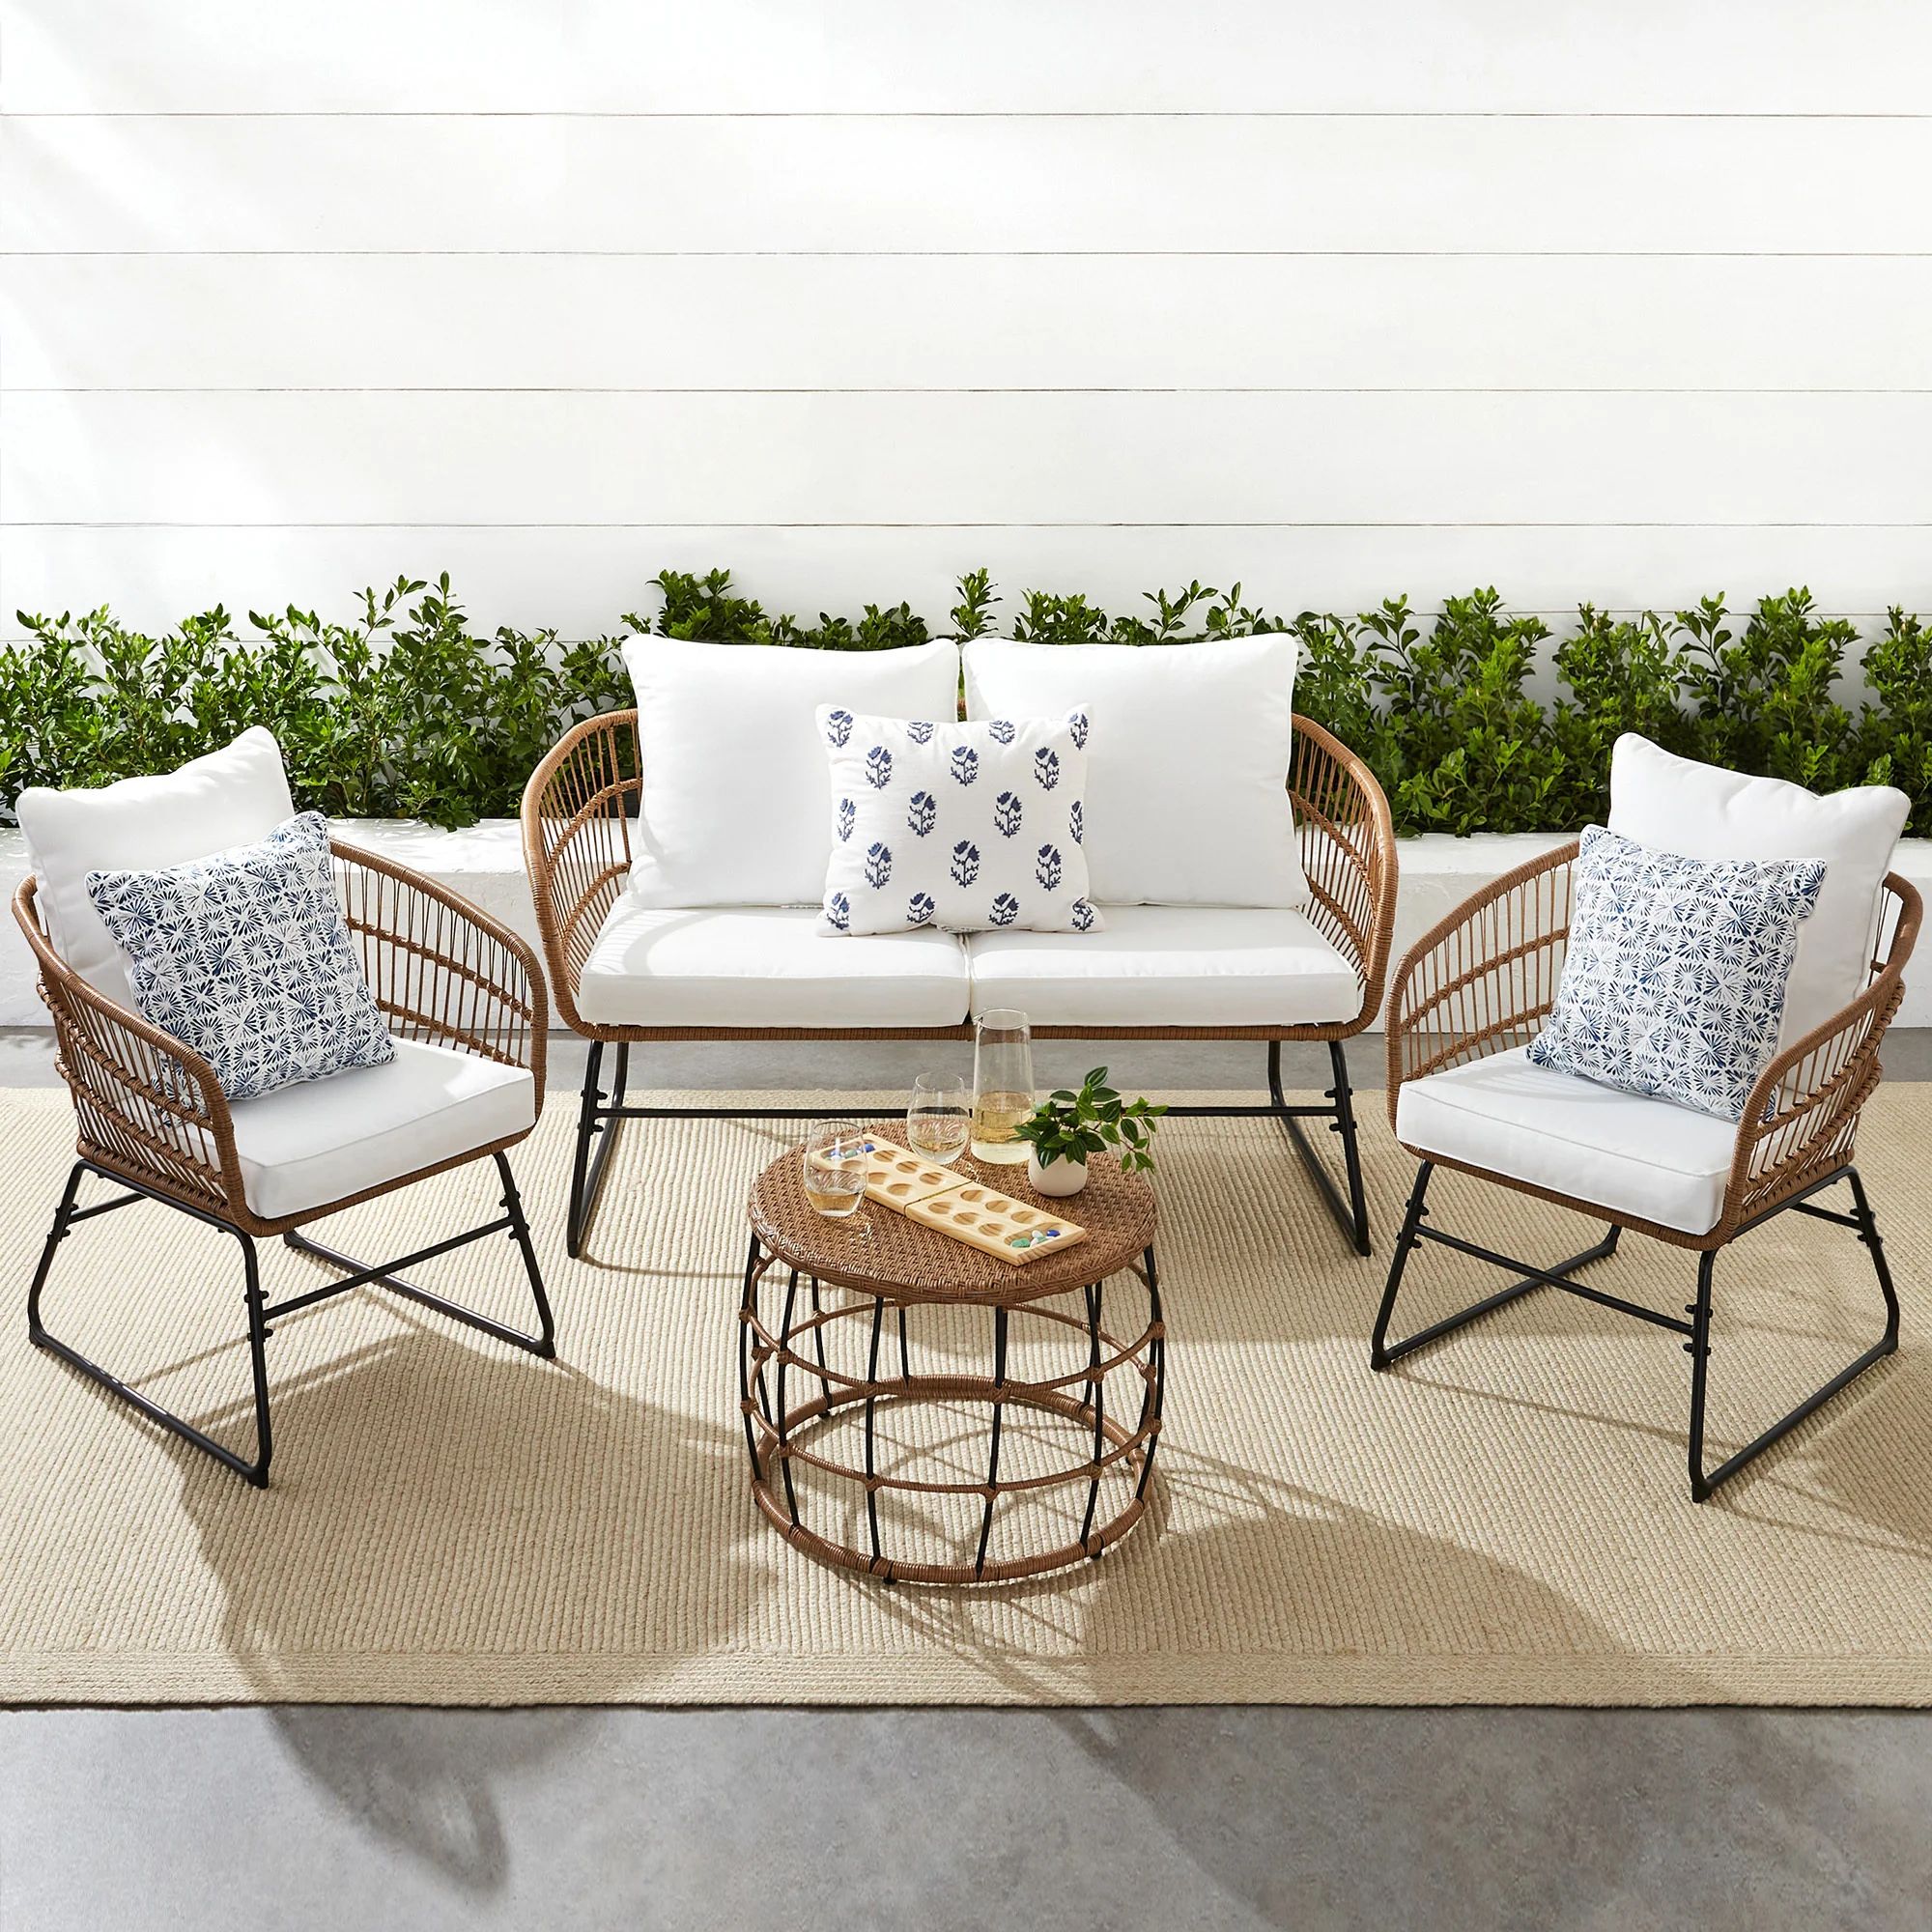 4-Piece Rope Wicker Outdoor Conversation Set w/ Cushions, Table | Best Choice Products 